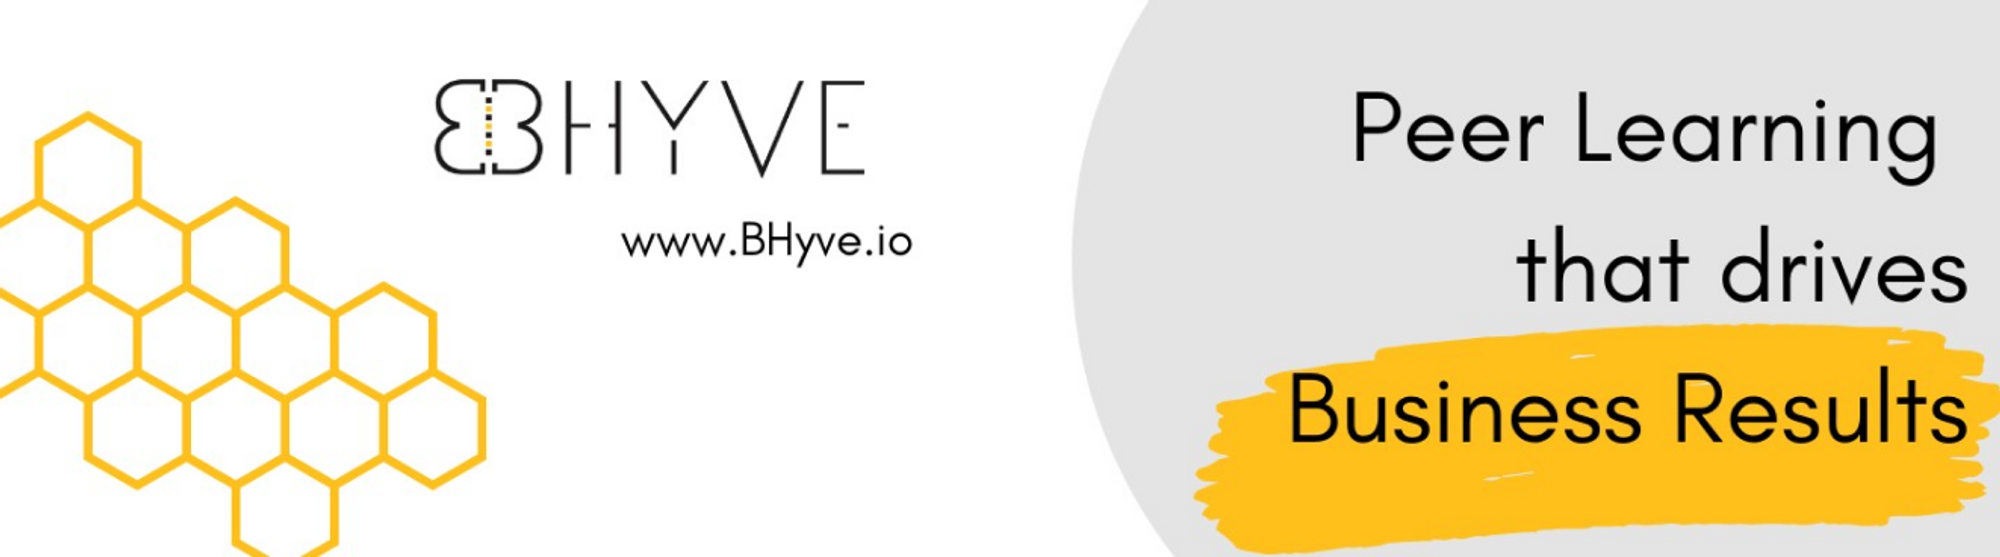 BHyve Cover Image